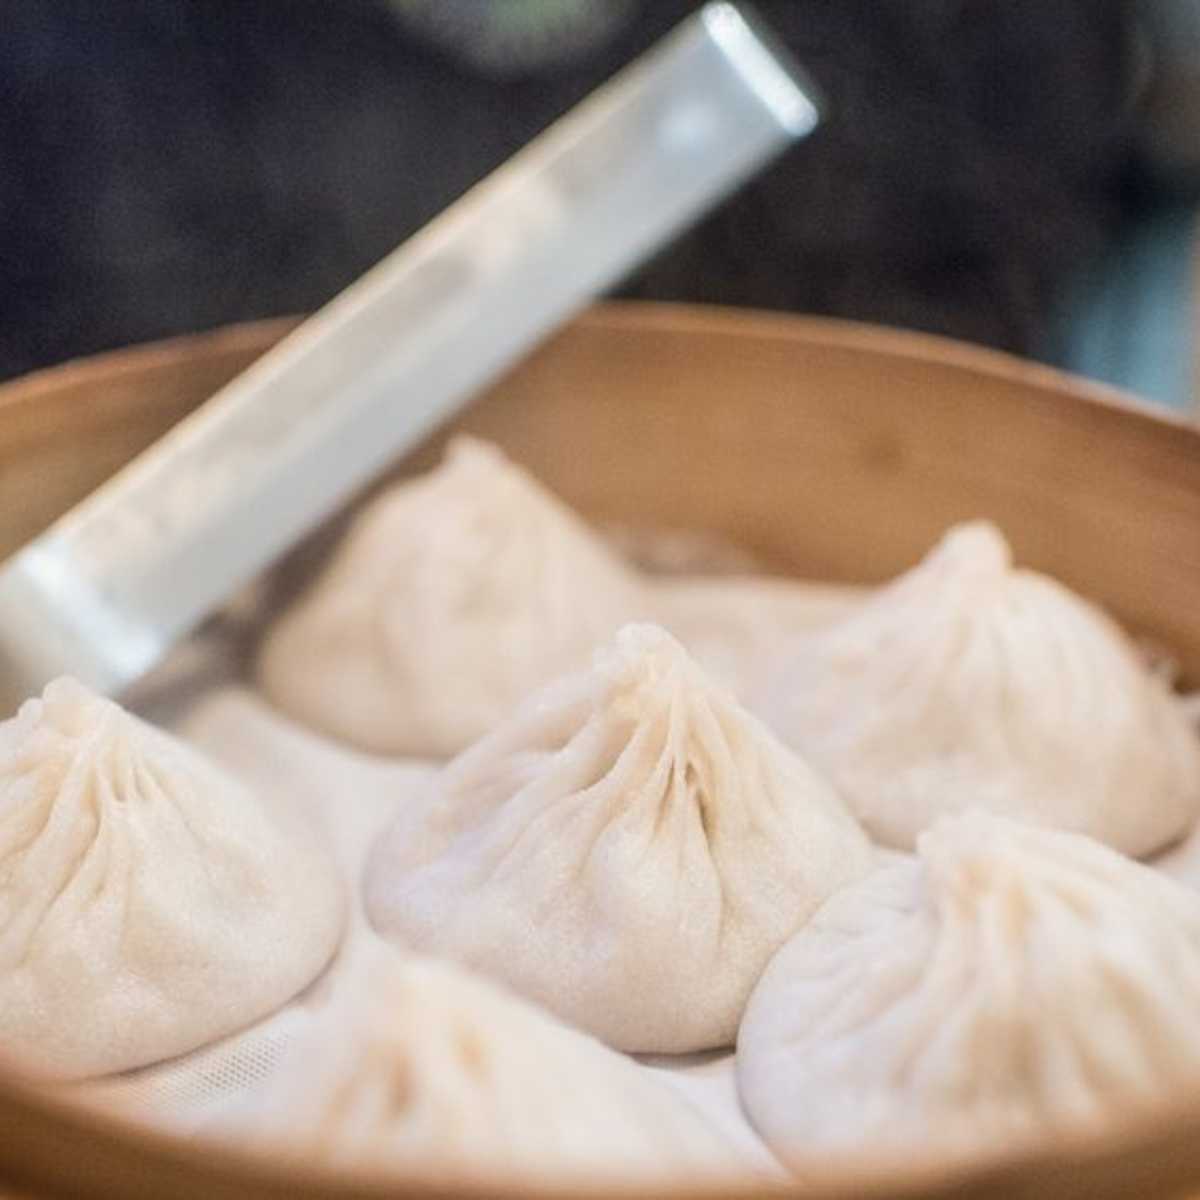 Kung Fu Xiao Long Bao Delivery Takeout 59 16 Main Street Queens Menu Prices Doordash